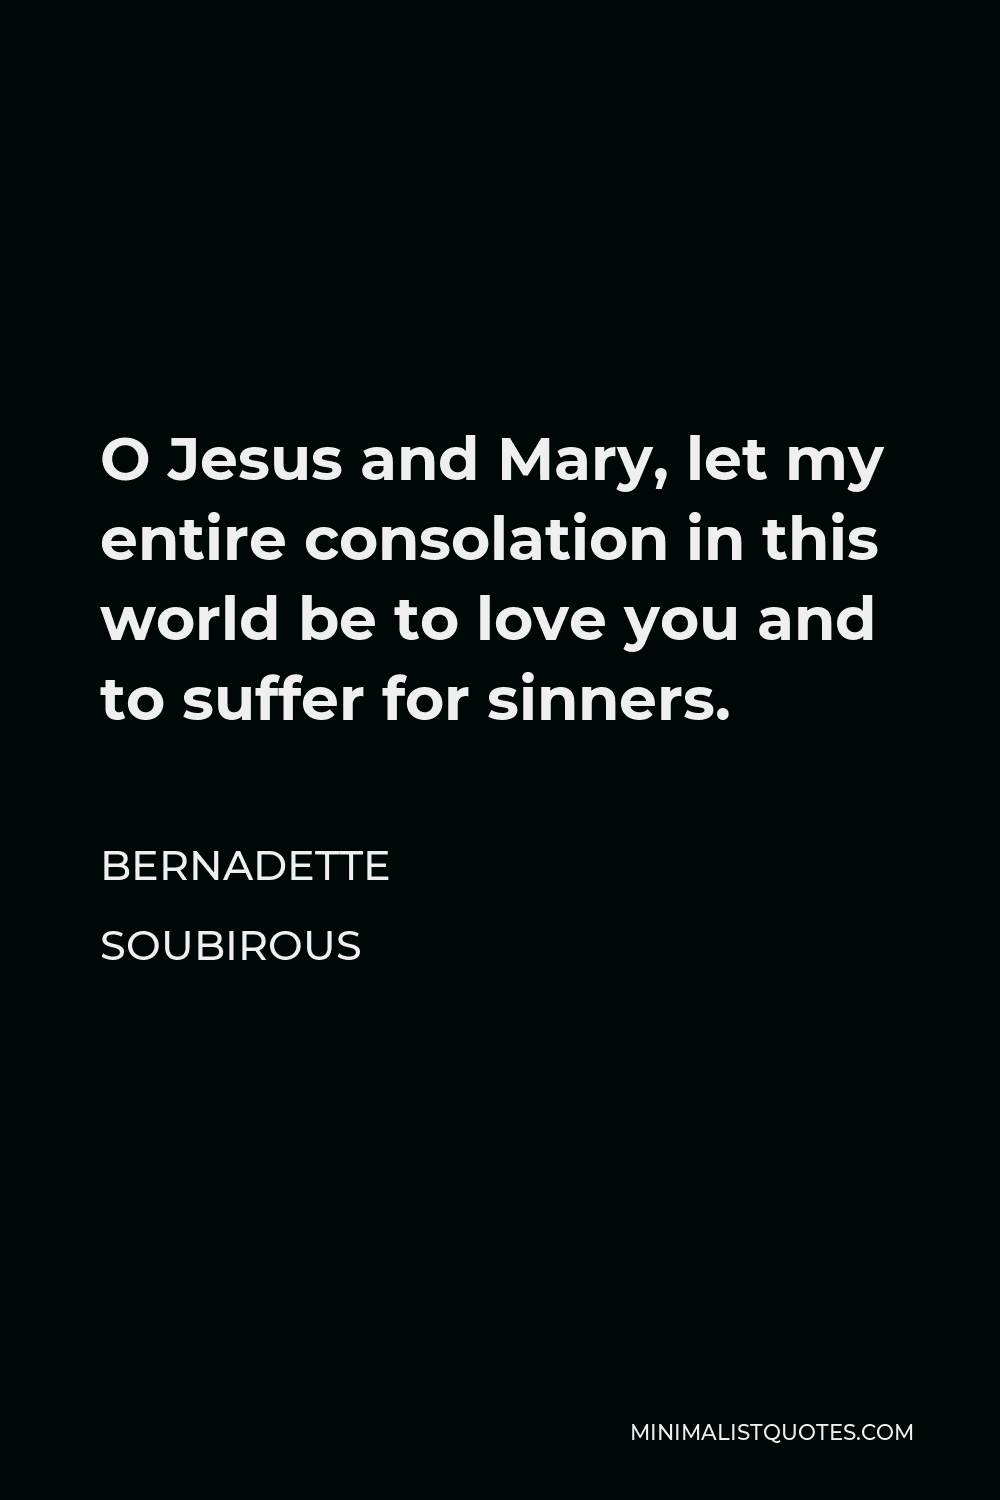 Bernadette Soubirous Quote - O Jesus and Mary, let my entire consolation in this world be to love you and to suffer for sinners.